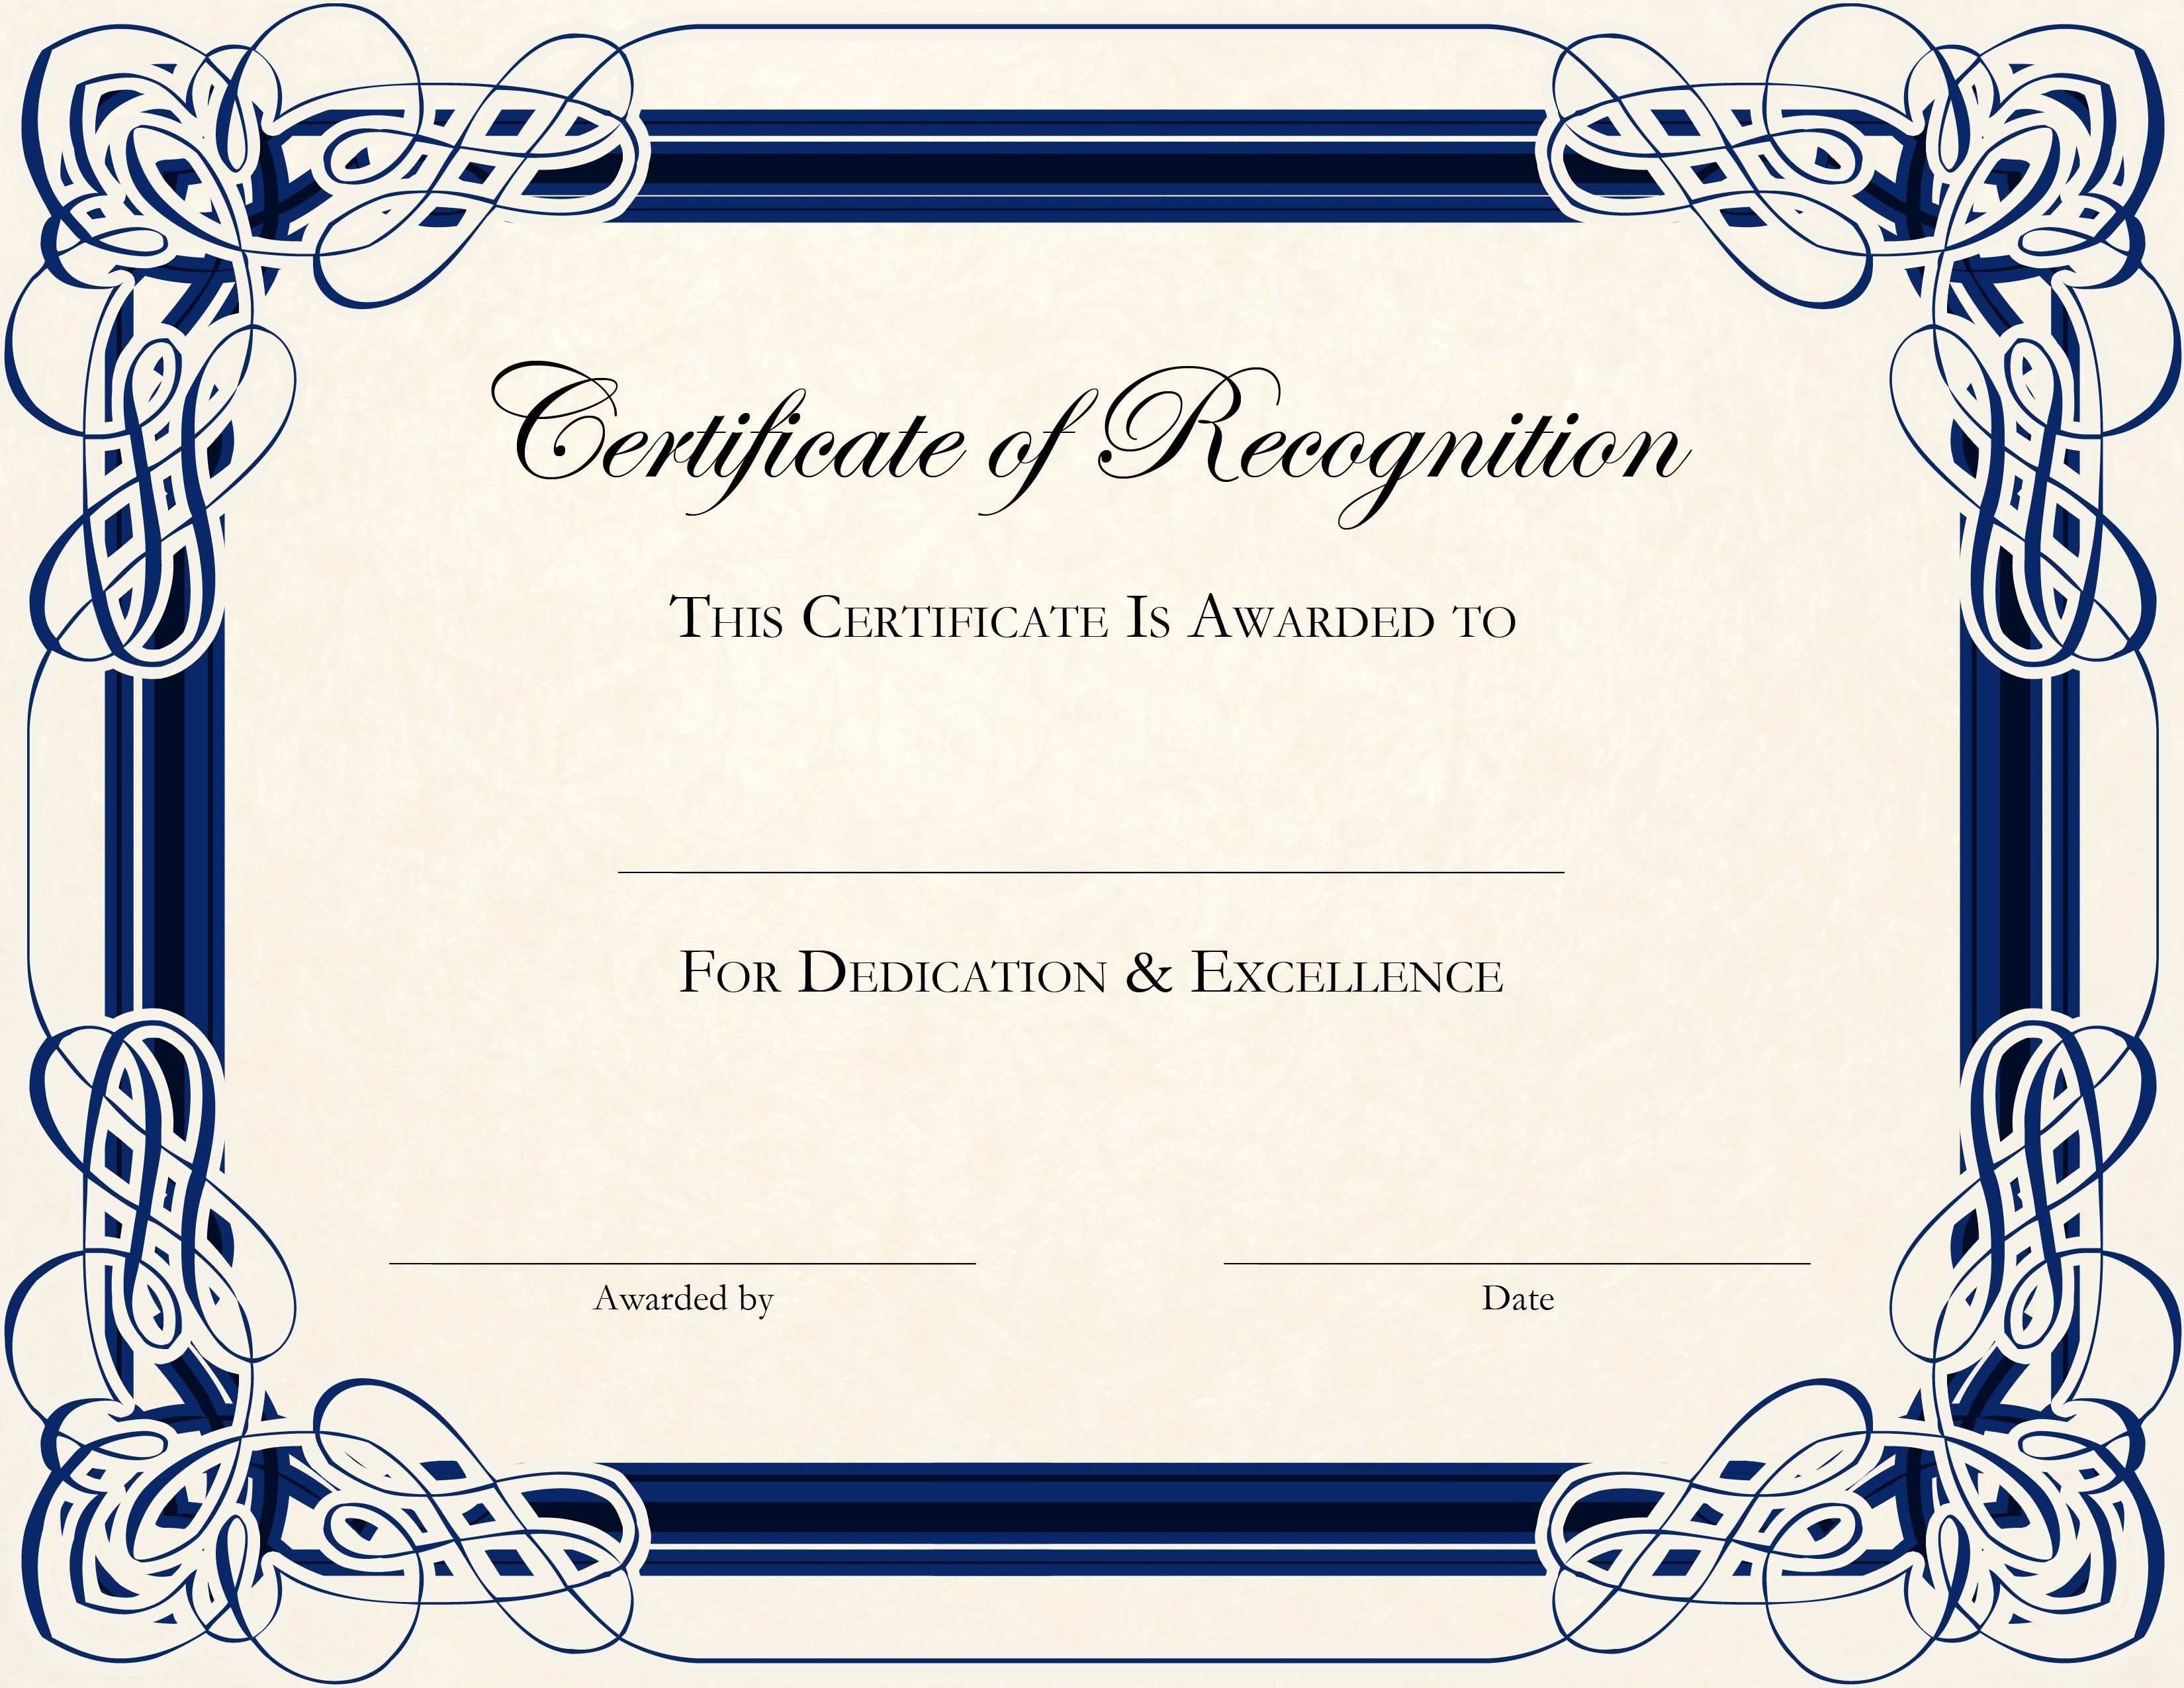 Free Printable Certificate Templates For Teachers | Besttemplate123 - Free Printable Certificates For Teachers